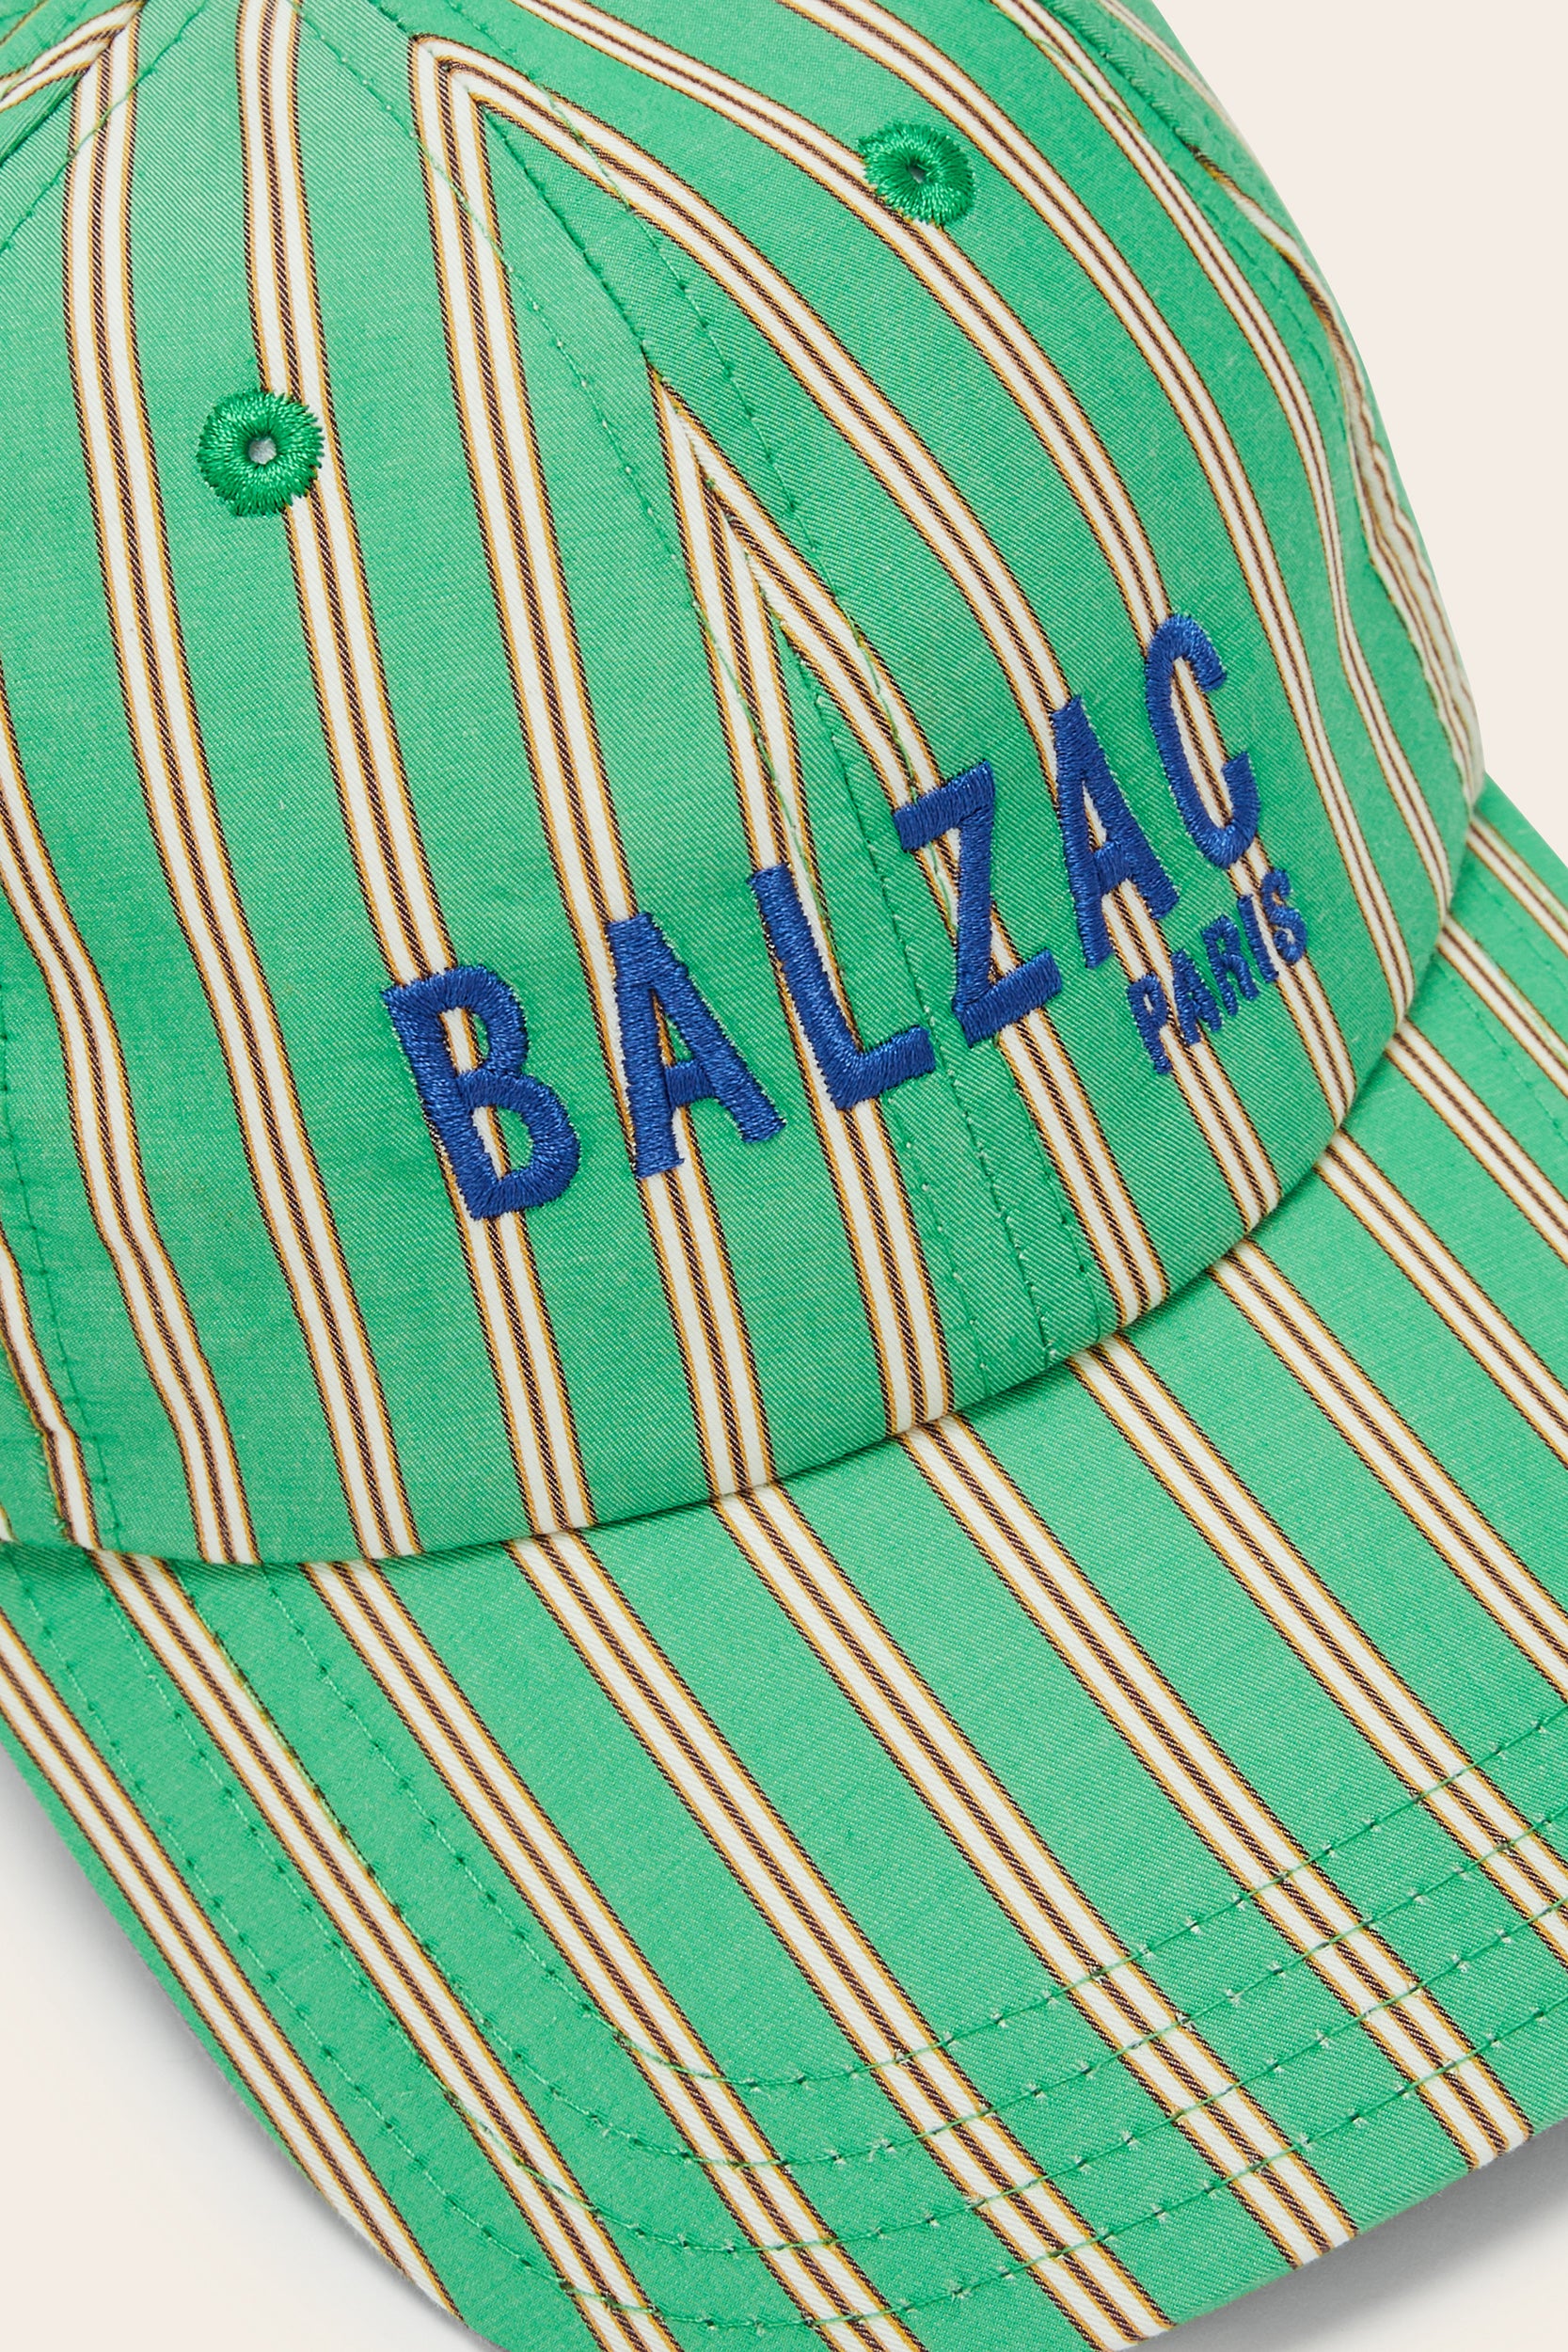 Espoir cap with green and navy stripes